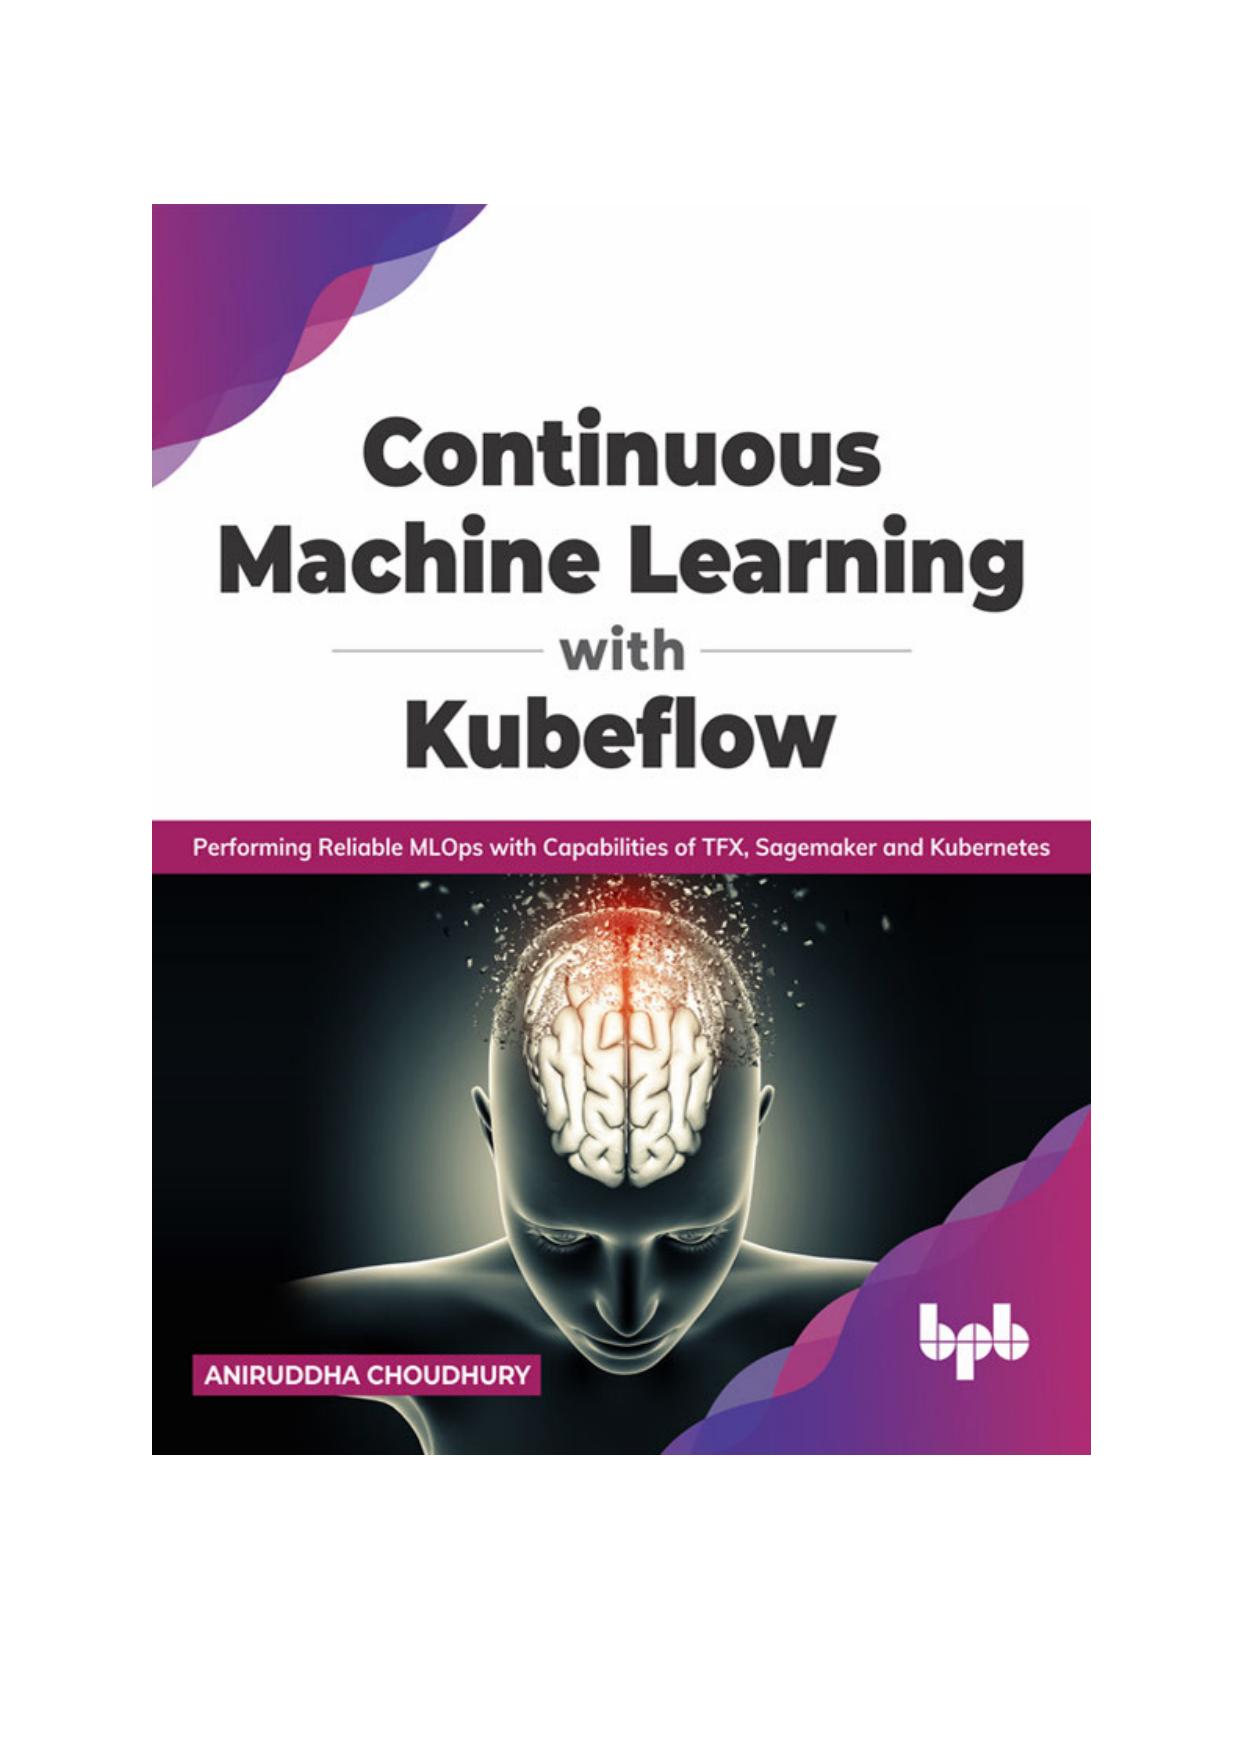 Continuous Machine Learning with Kubeflow: Performing Reliable MLOps with Capabilities of TFX, Sagemaker and Kubernetes (English Edition)